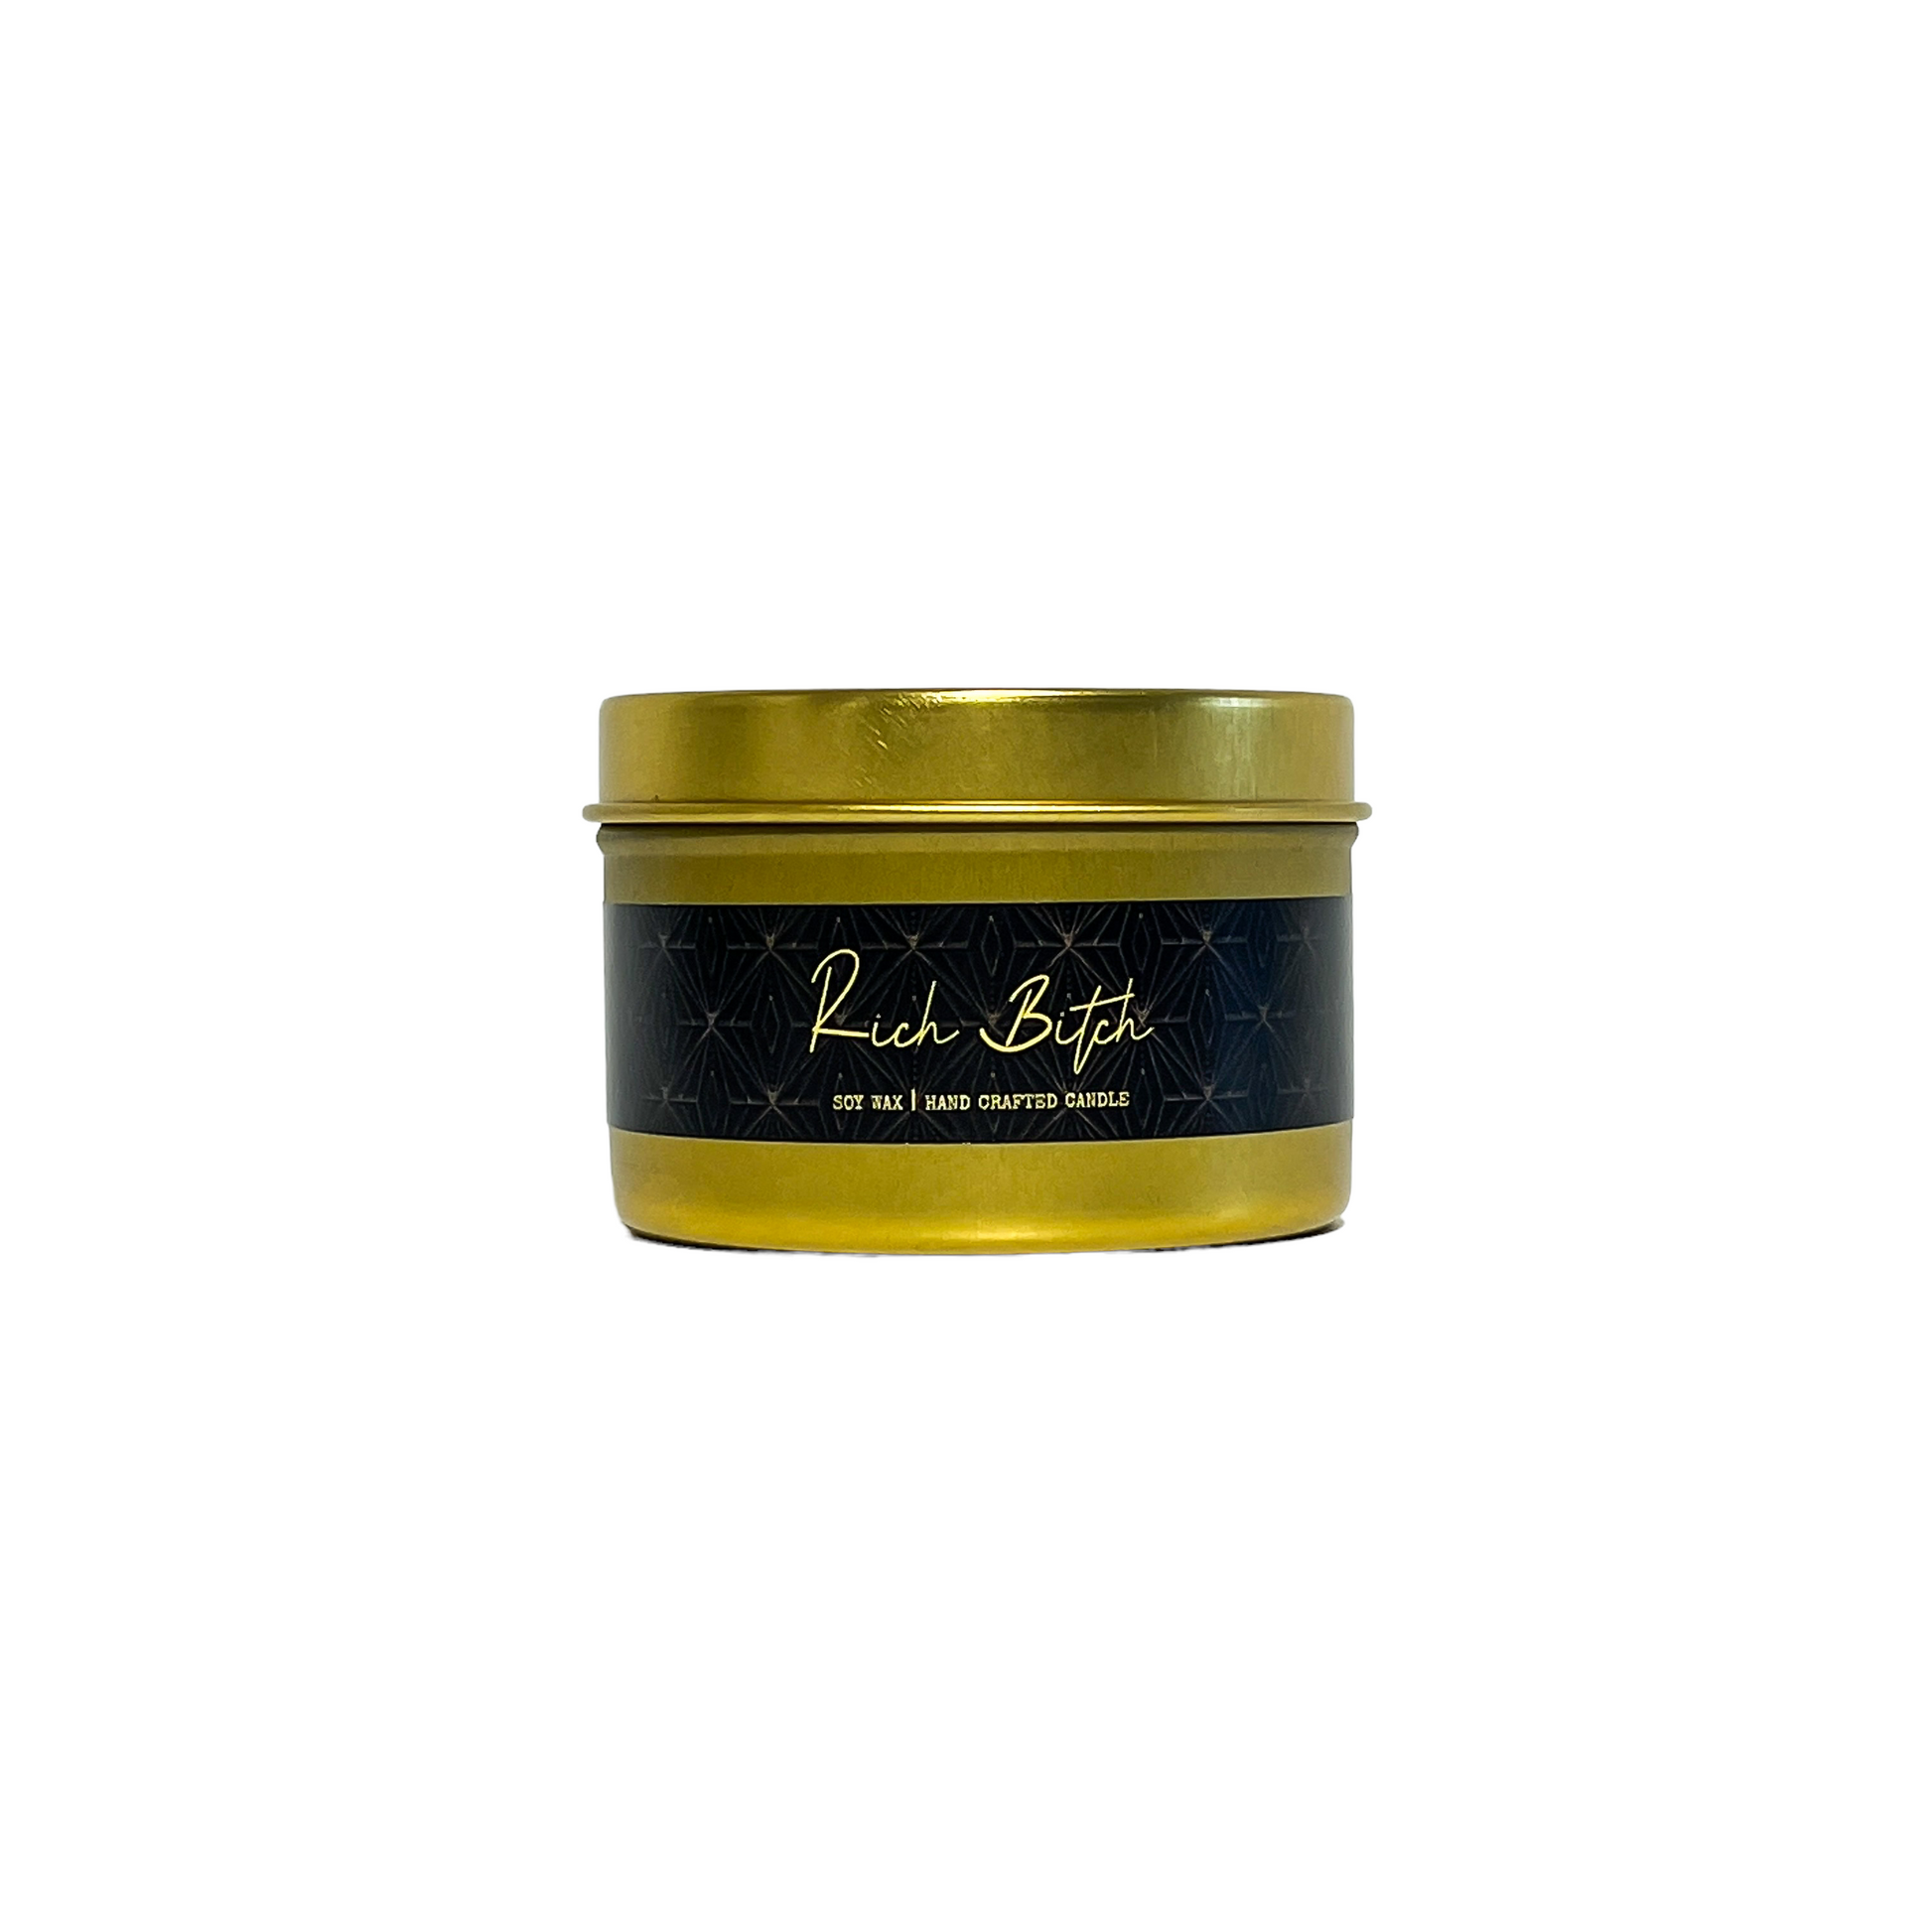 Gold, four ounce, oud, bergamot, and citrus scented soy wax candle with a gold lid and a black label that reads Rich Bitch